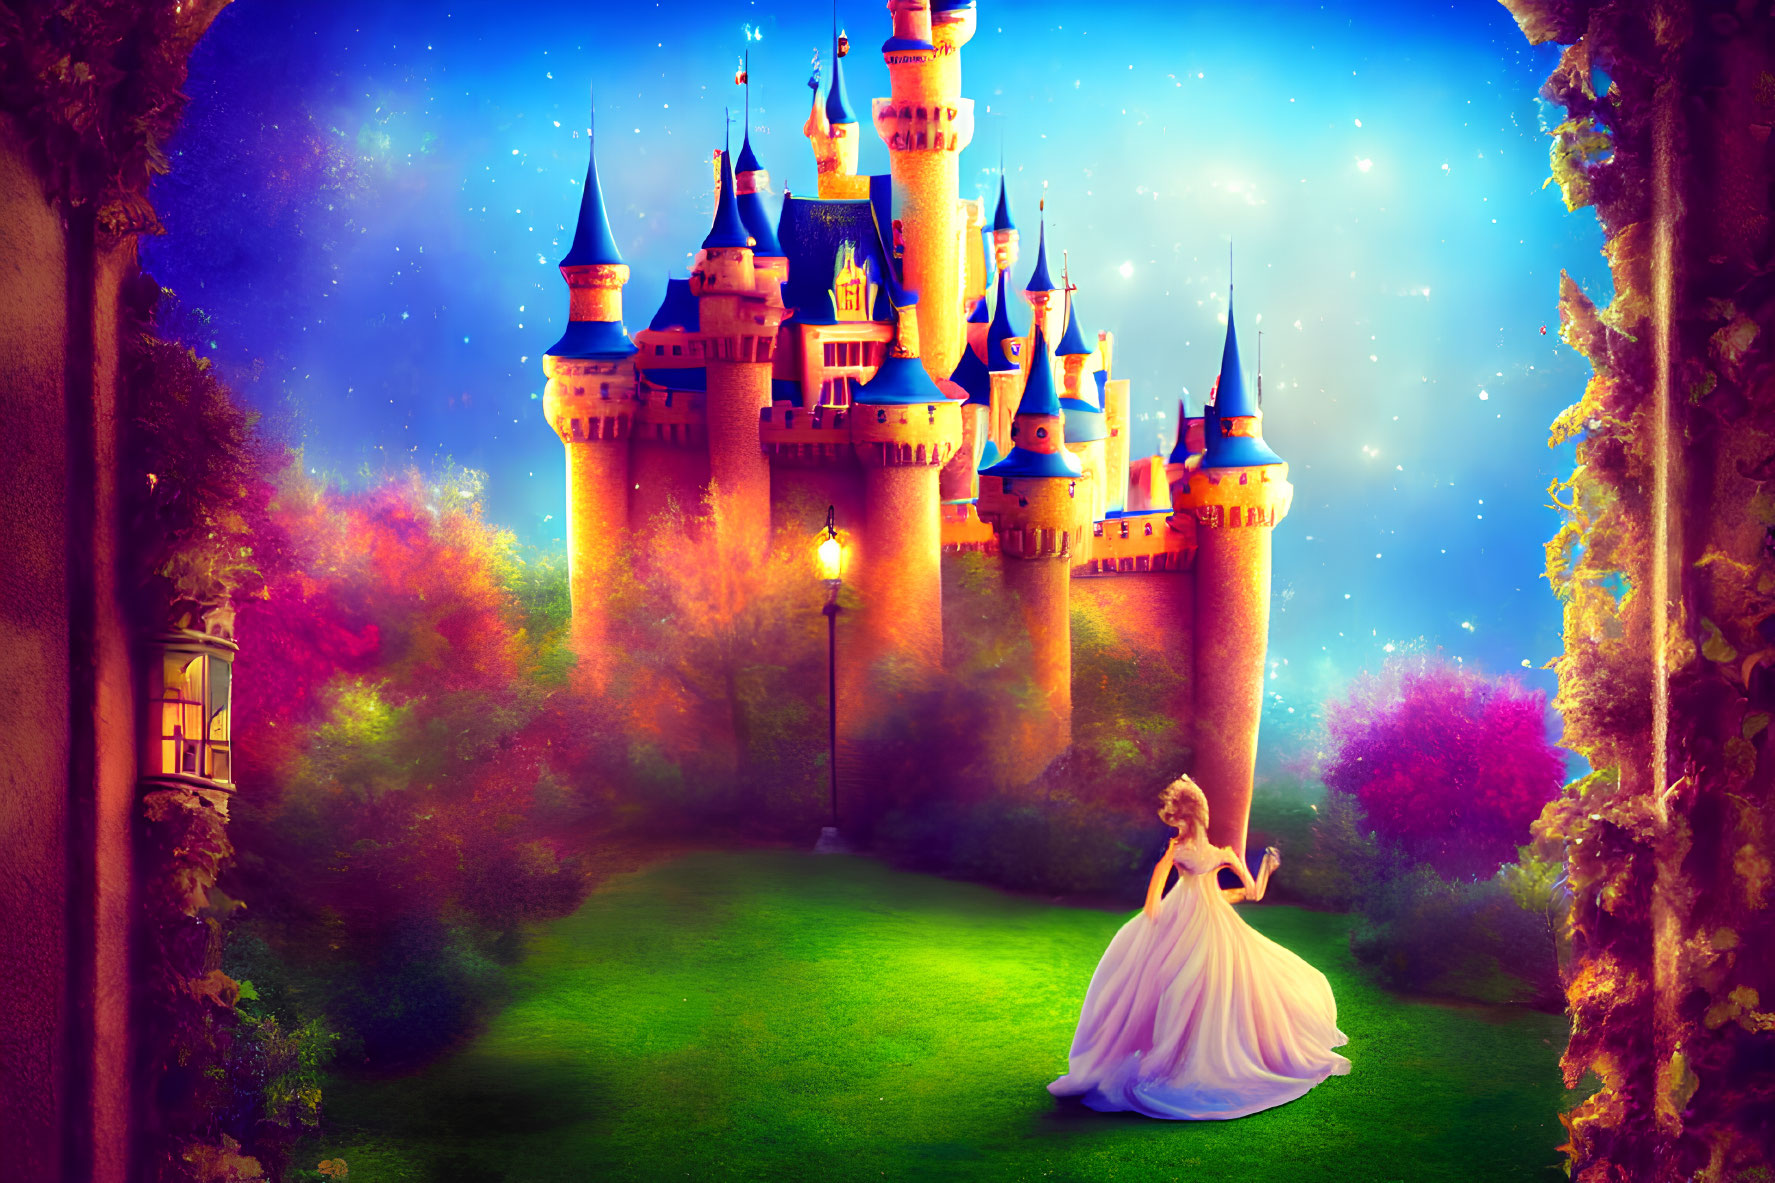 Woman in white gown at colorful castle gardens under starry sky